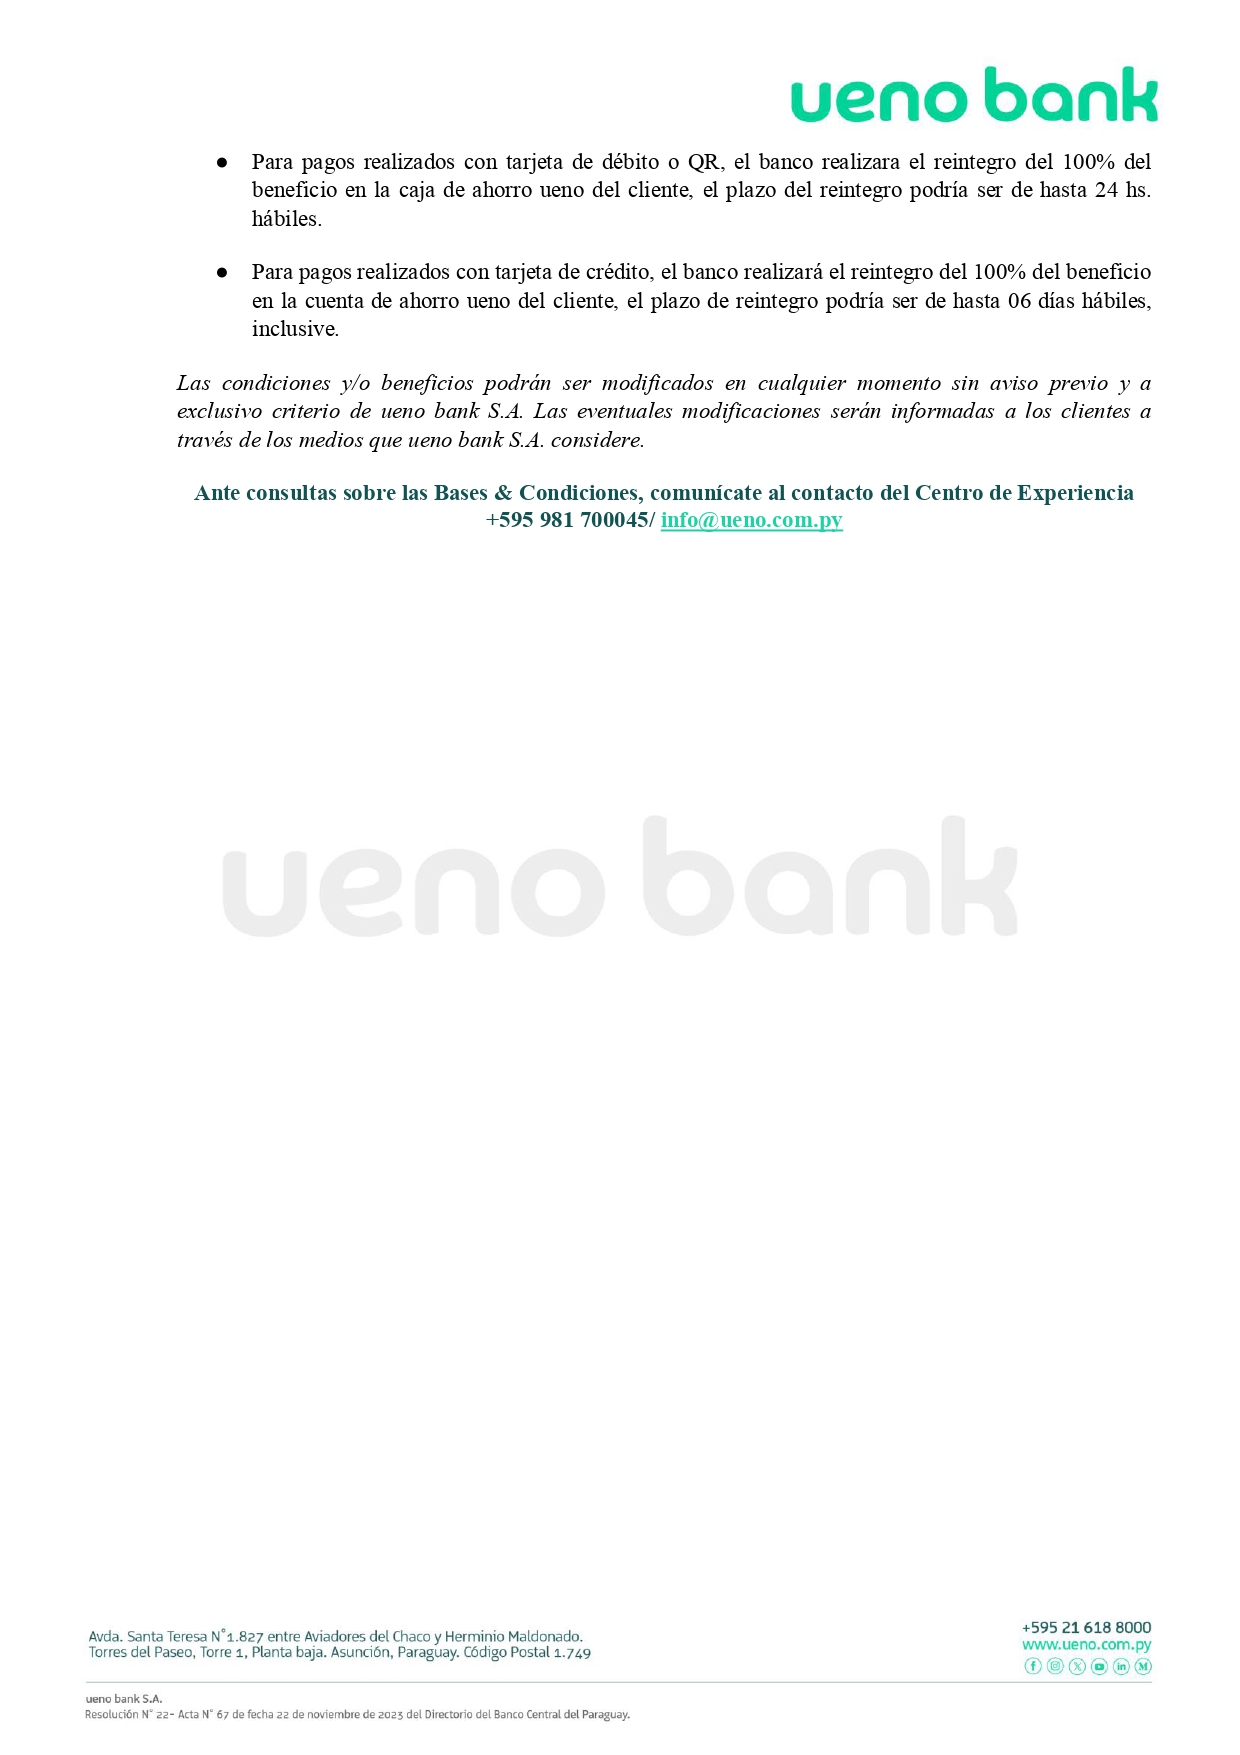 byc conto abril_page-0002.jpg